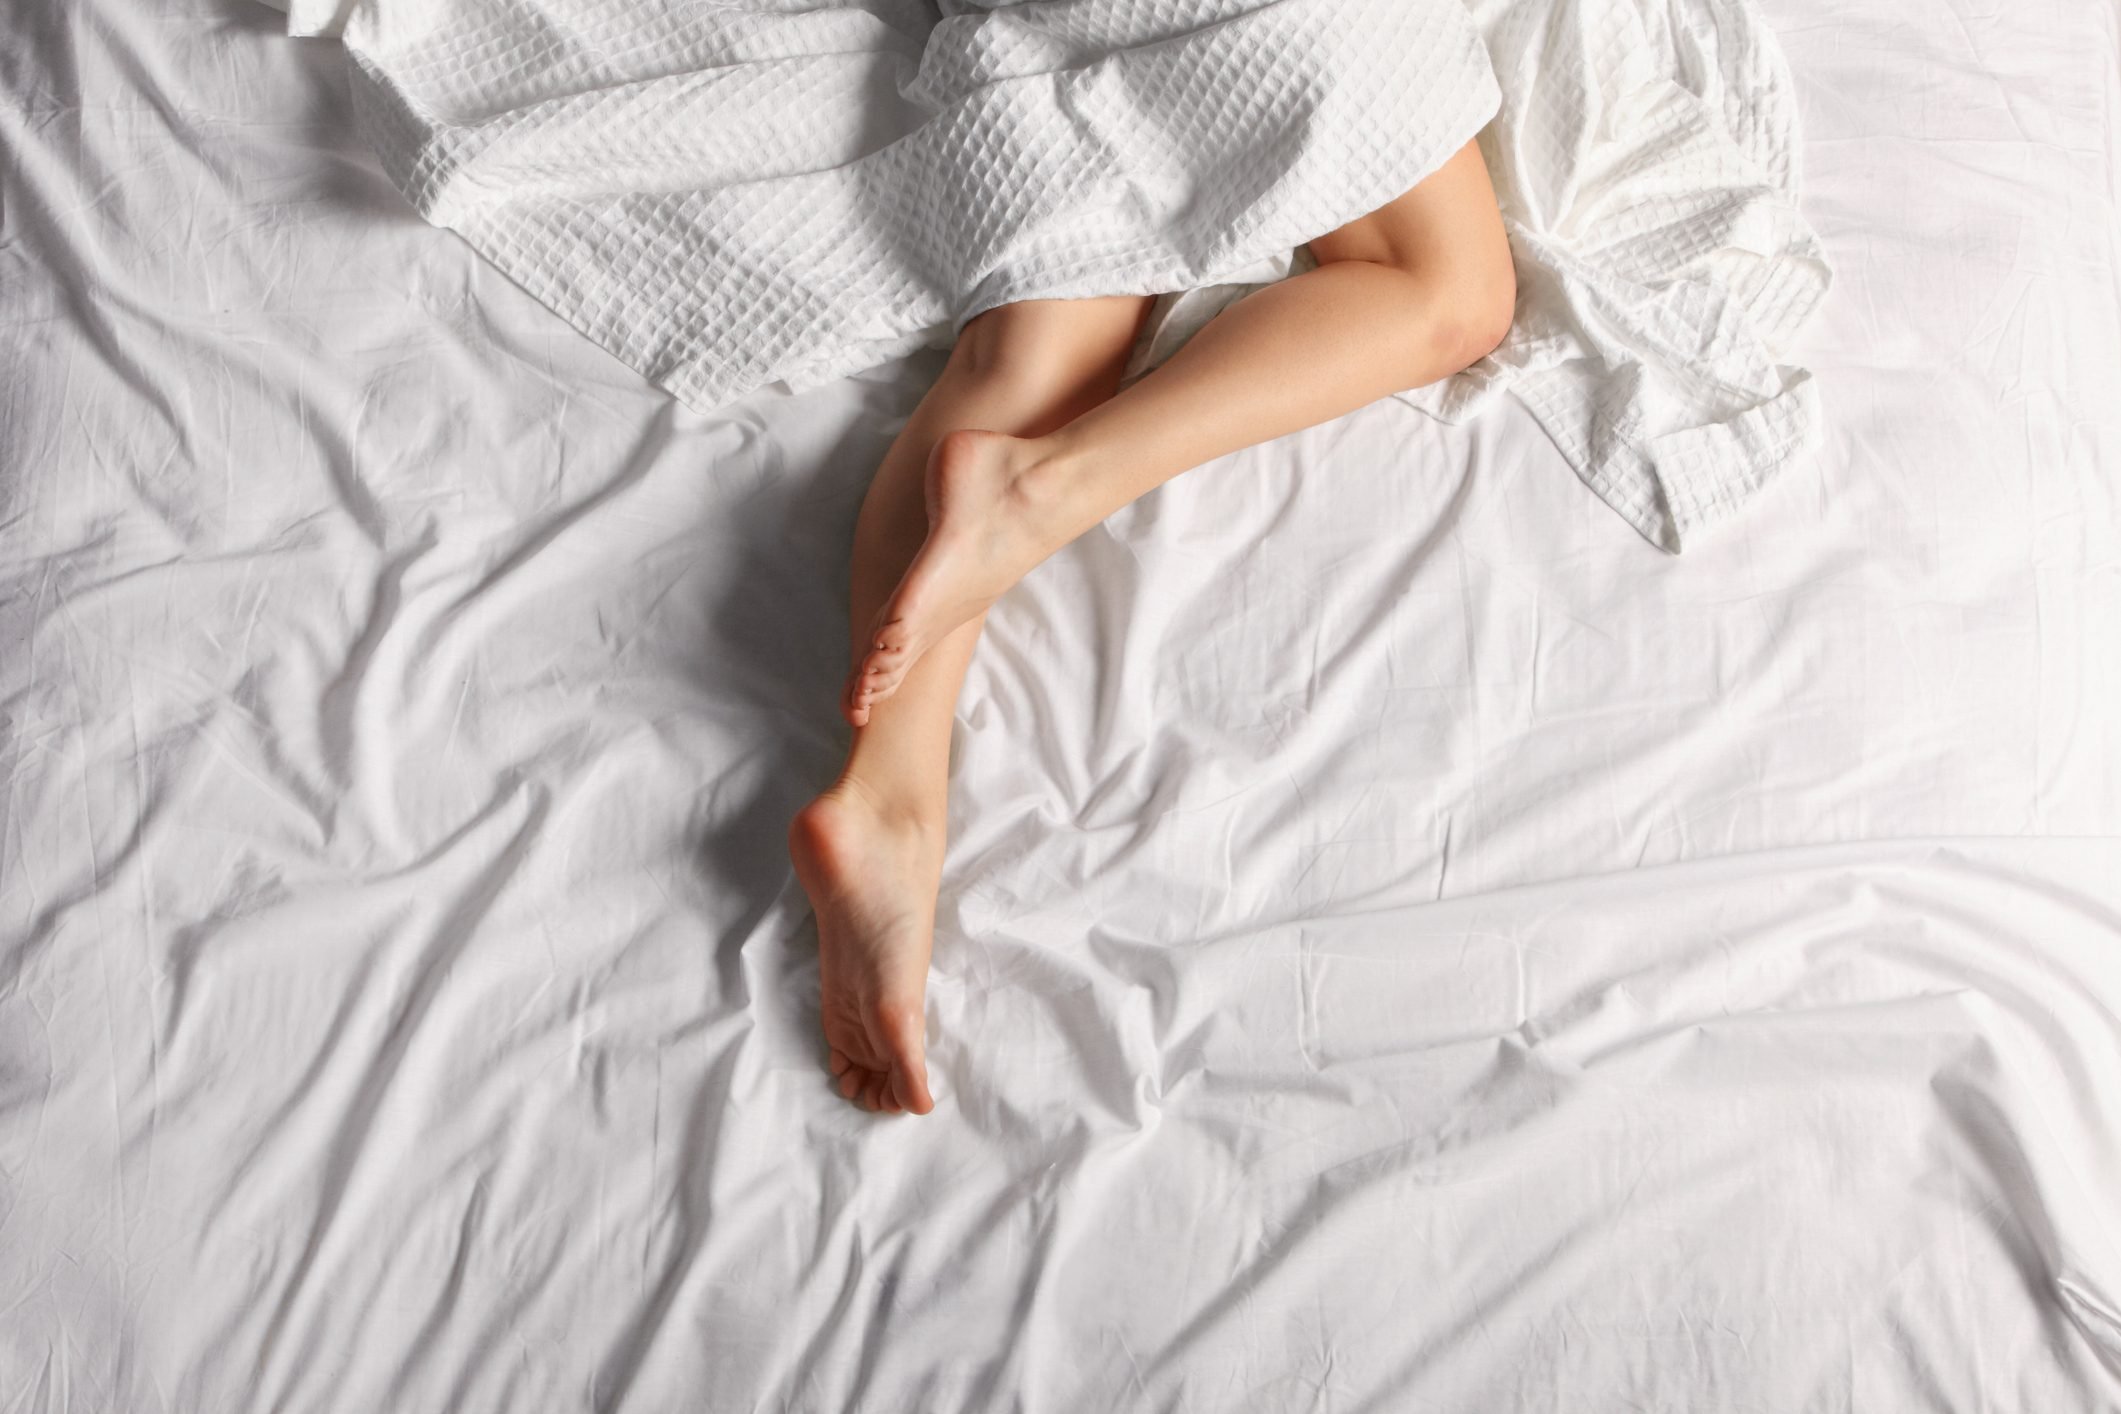 Sleeping Without Underwear: Is It Good to Go Commando?